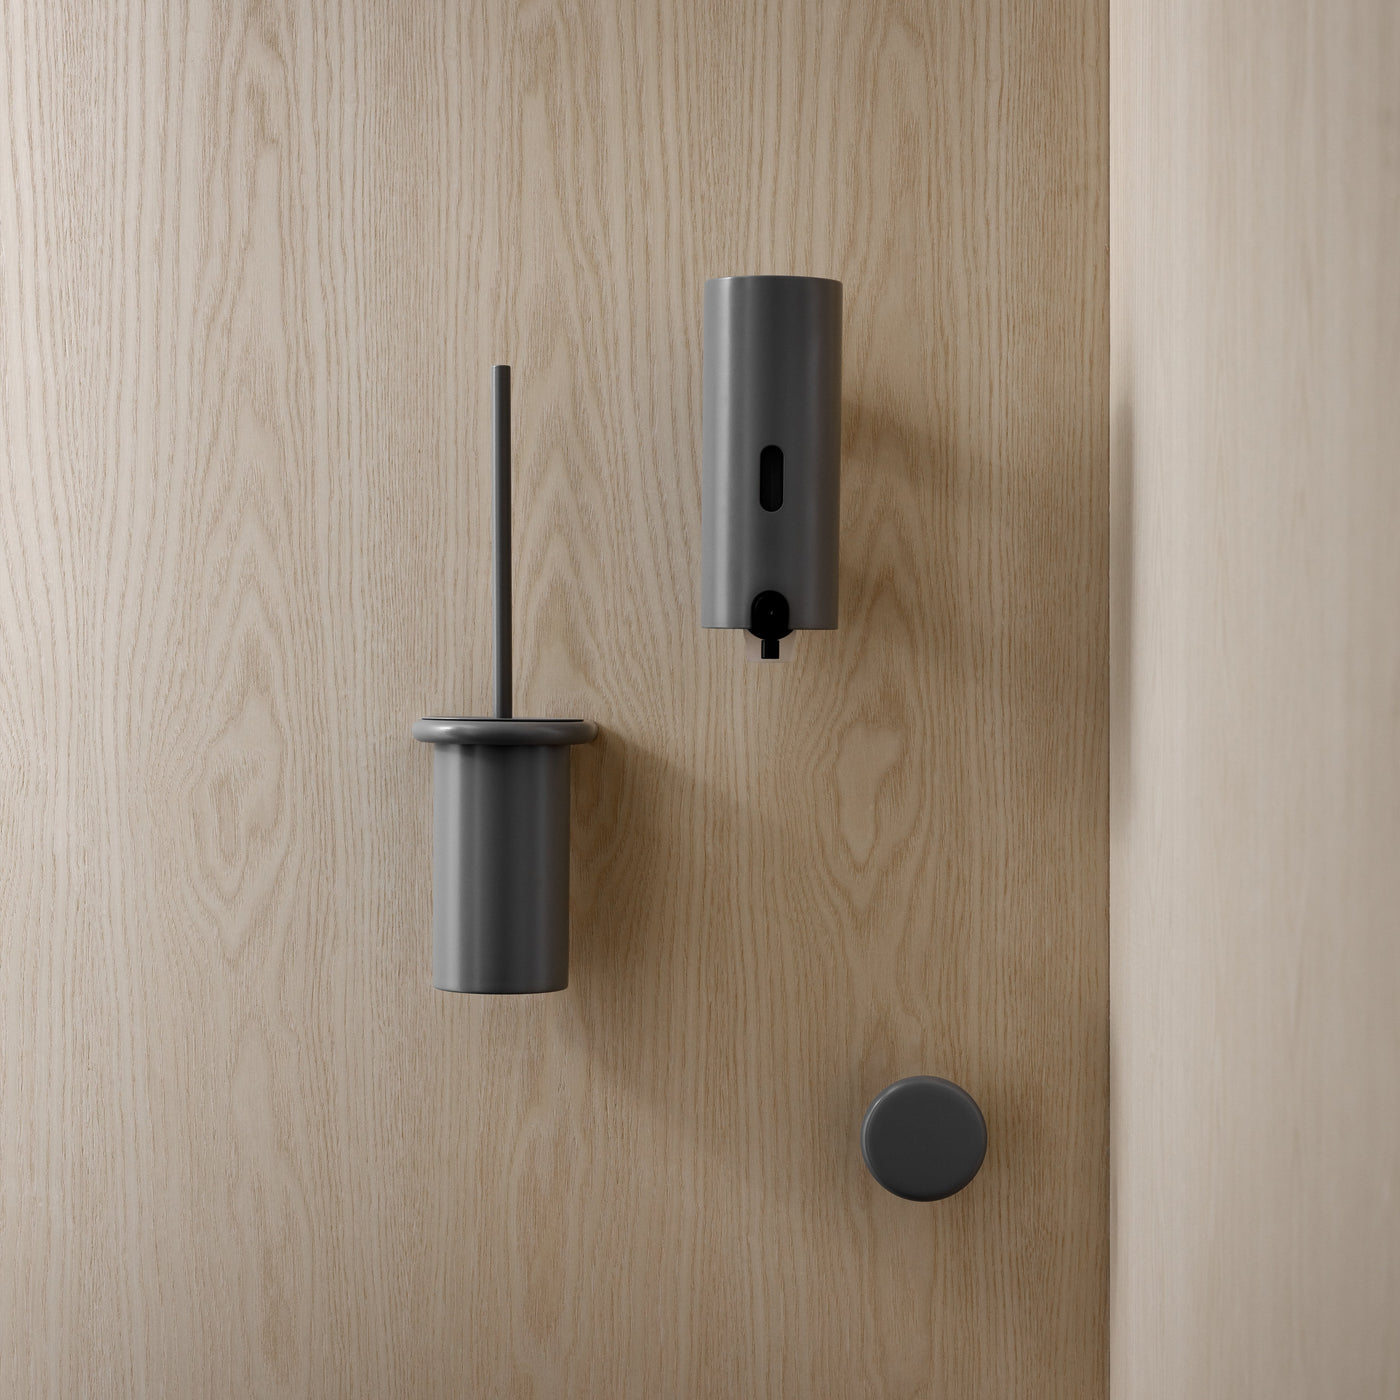 With a series of classic fittings that form a cohesive whole, d line offers a sanitary collection in a variety of finishes.